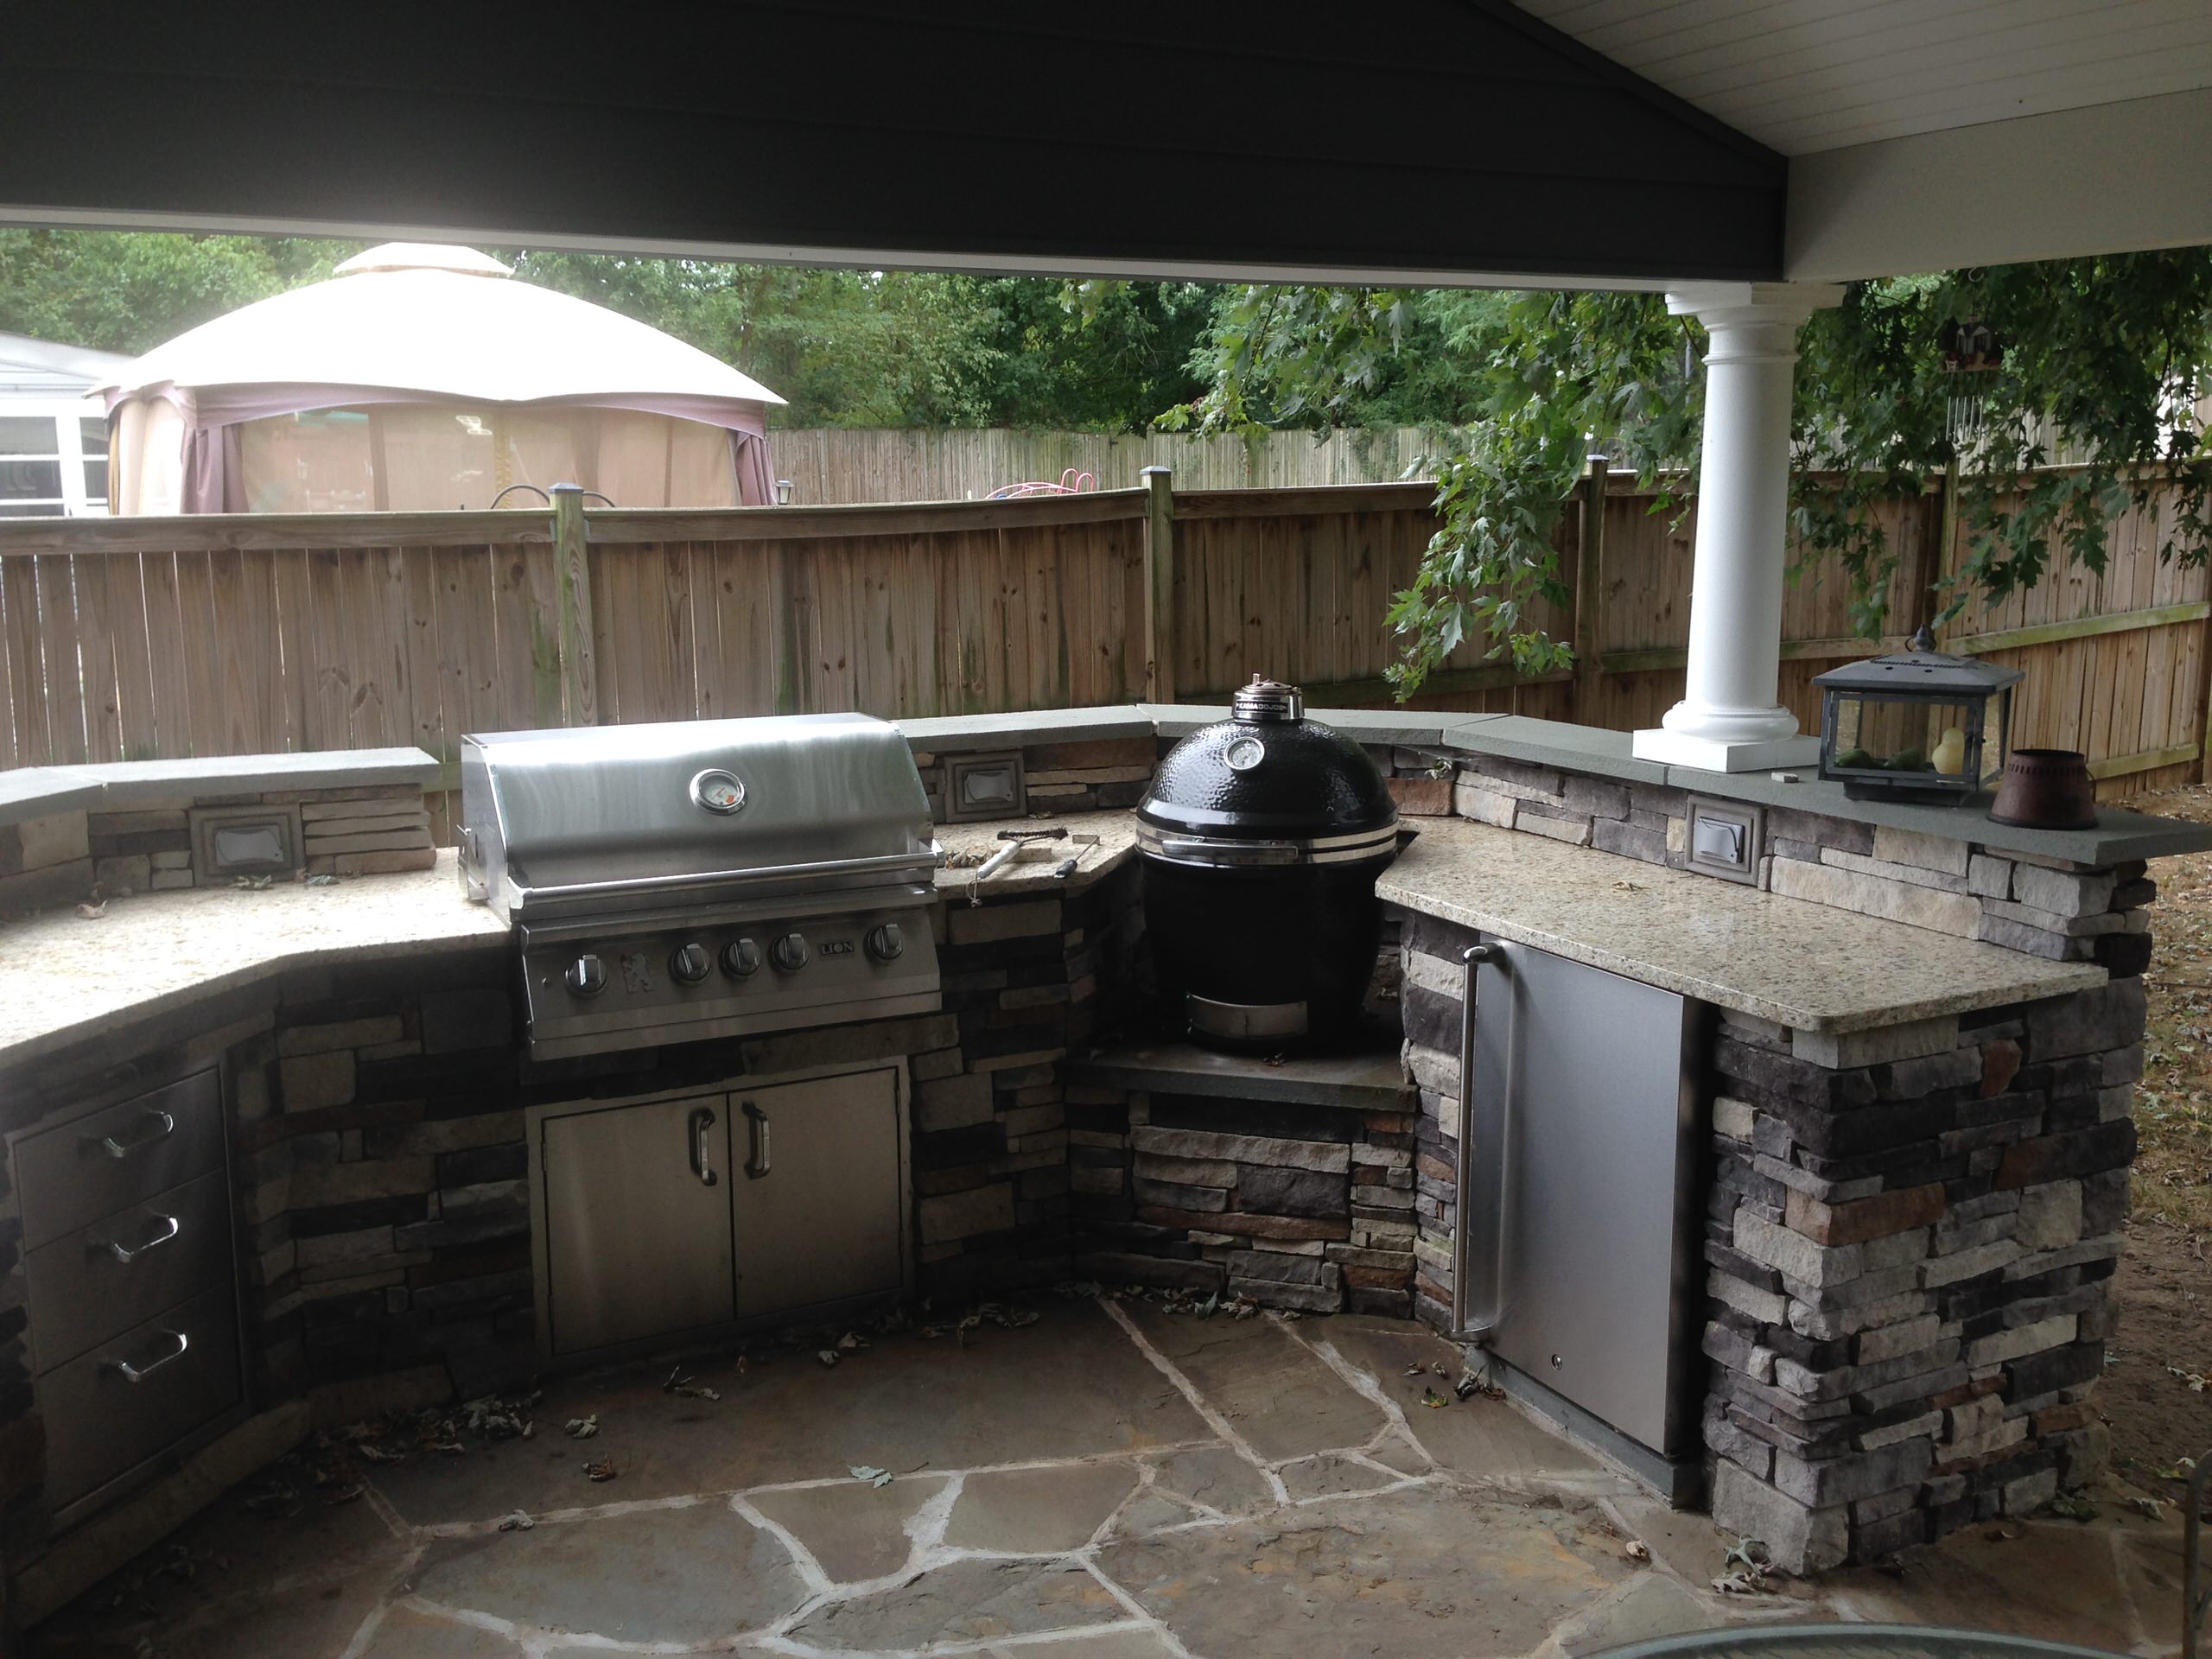 Outdoor Kitchen Project